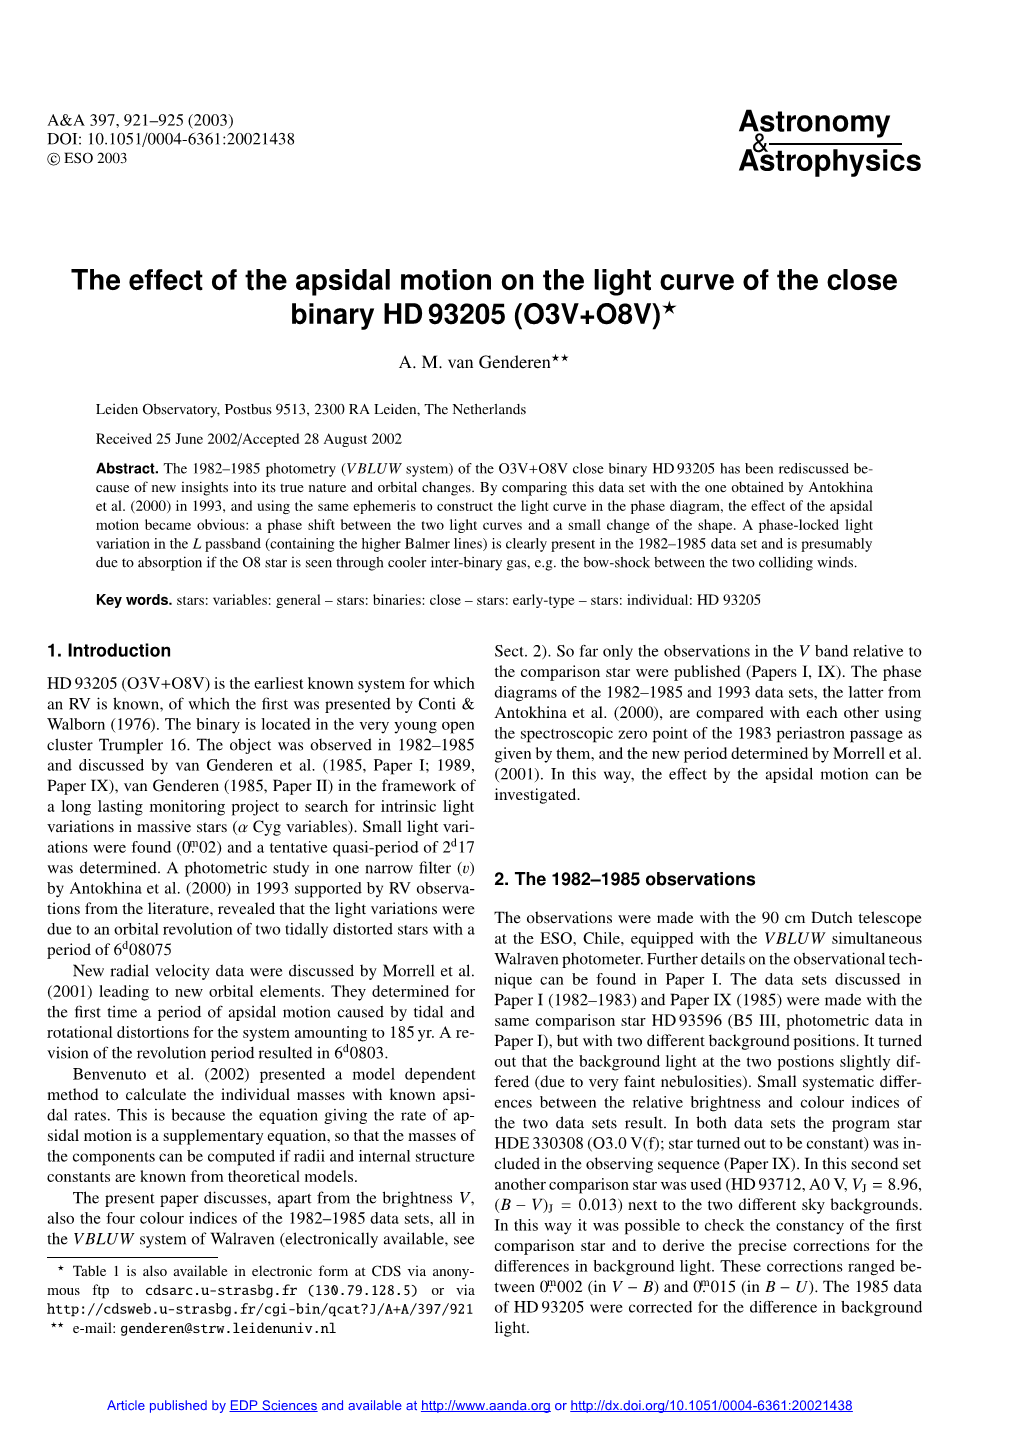 The Effect of the Apsidal Motion on the Light Curve of the Close Binary HD 93205 (O3V+O8V)?